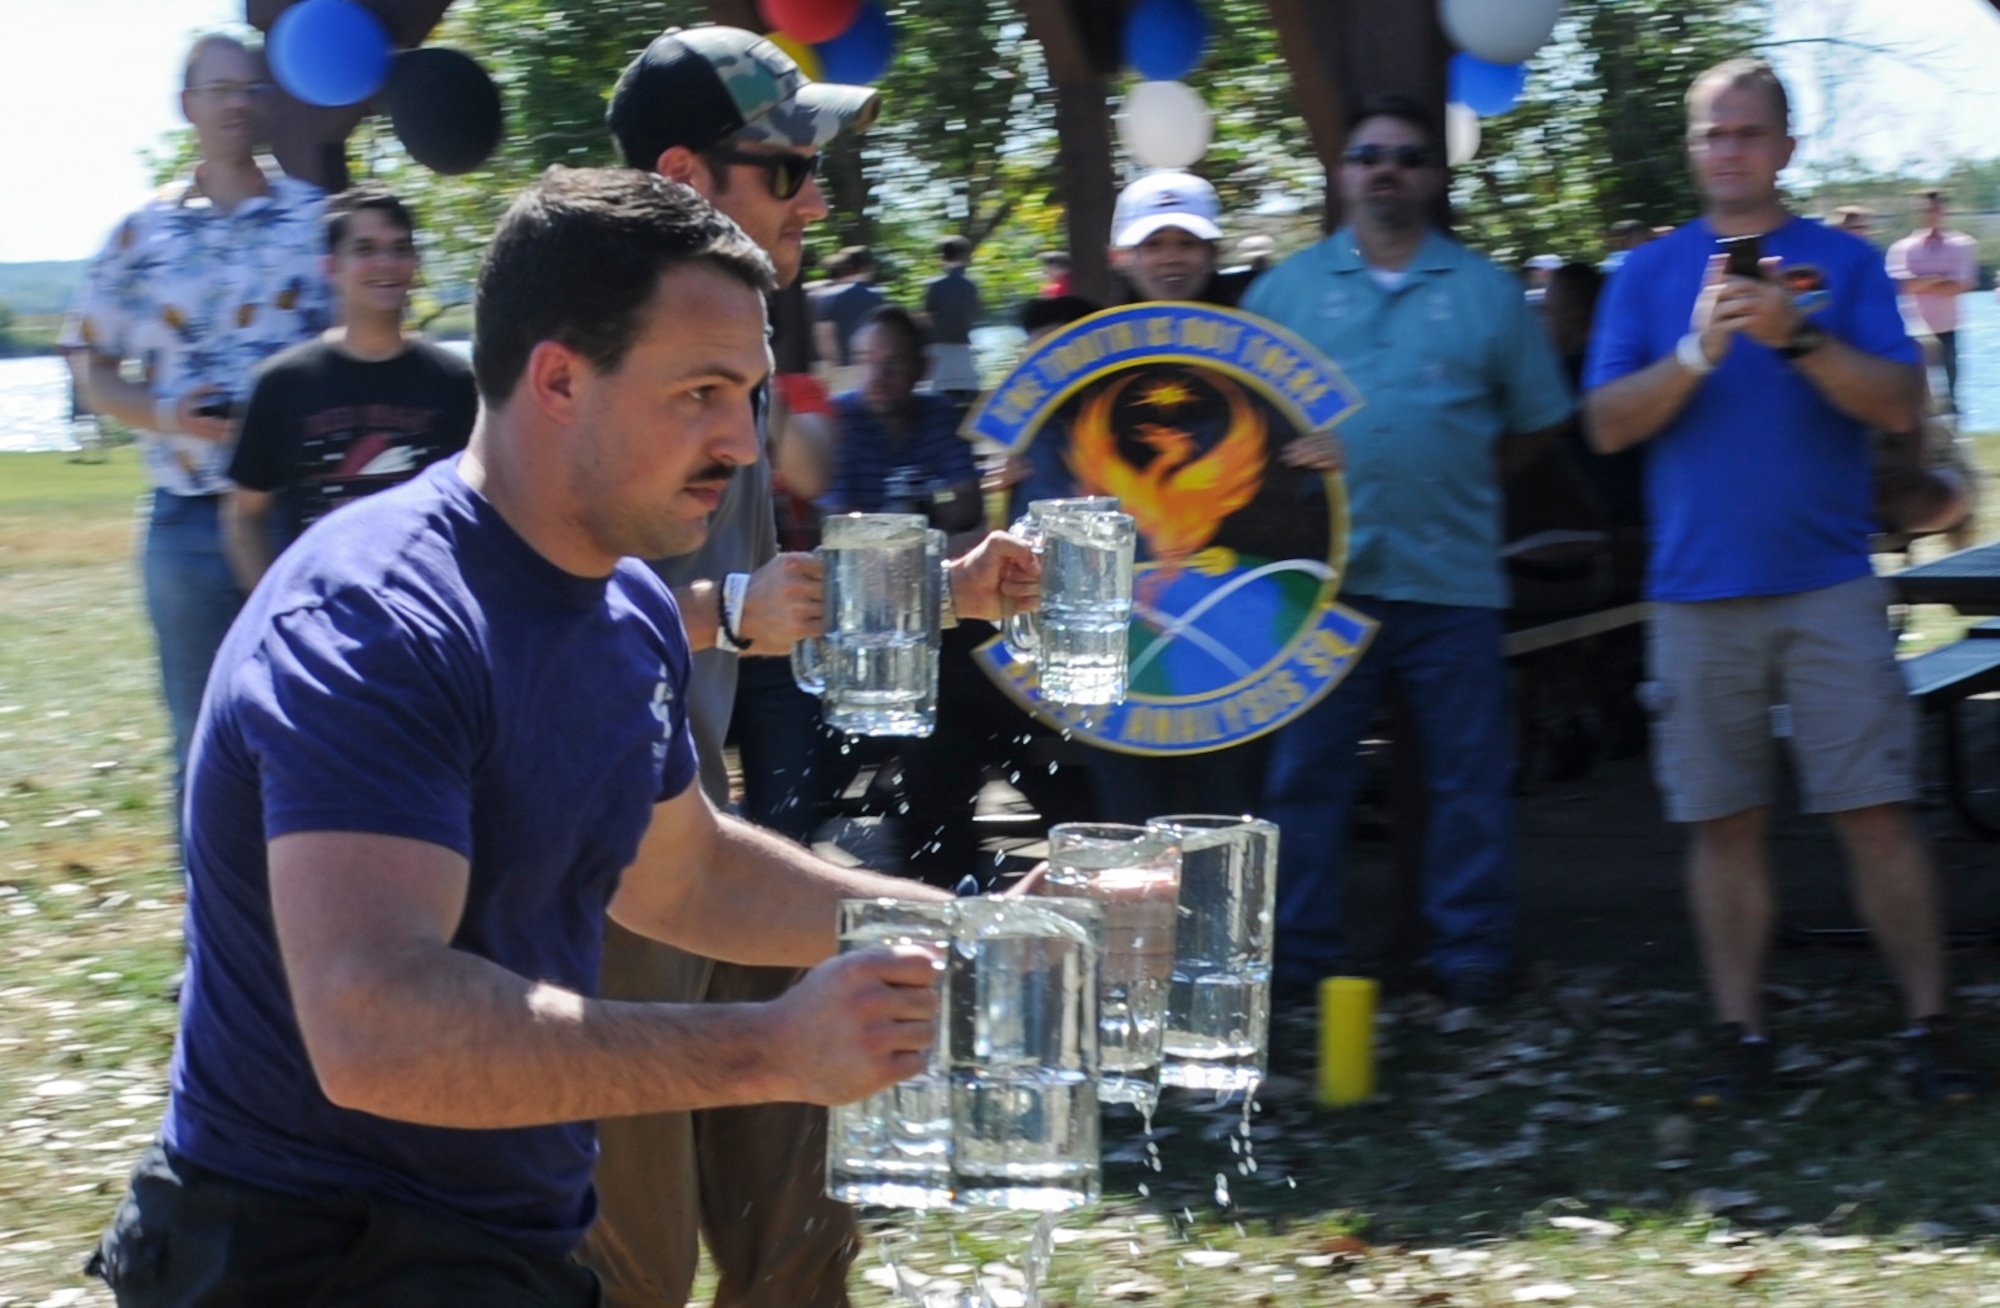 Garret Rose, National Air and Space Intelligence Center member, races to the finish line during the Stein Relay Race at NASIC’s annual Oktoberfest at Bass Lake, Wright-Patterson Air Force Base, Ohio on Sept. 27, 2019. The race was a new addition to Oktoberfest this year, replacing the log sawing competition. (U.S. Air Force photo by Senior Airman Samuel Earick/Released)